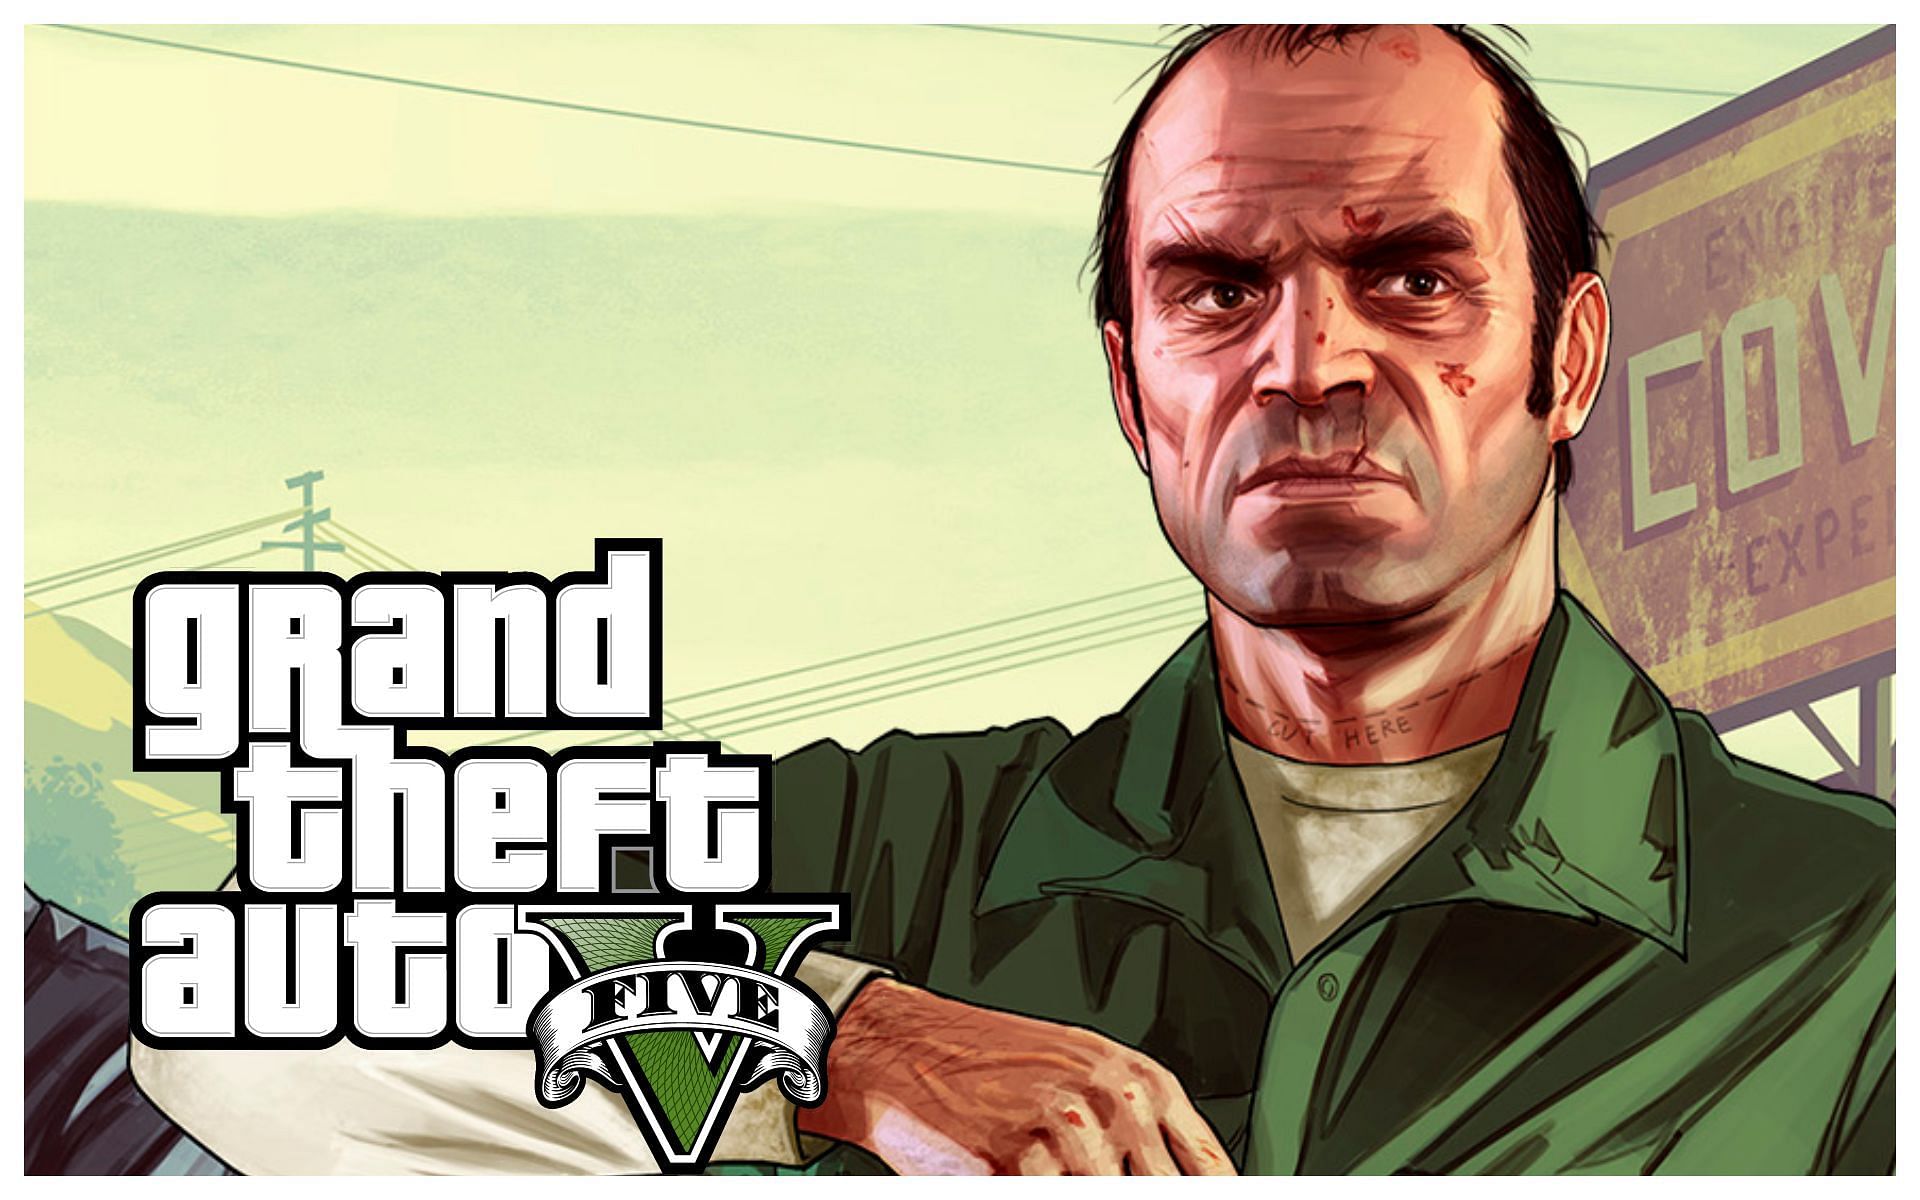 These are some of the popular controversies (Images via Rockstar Games)